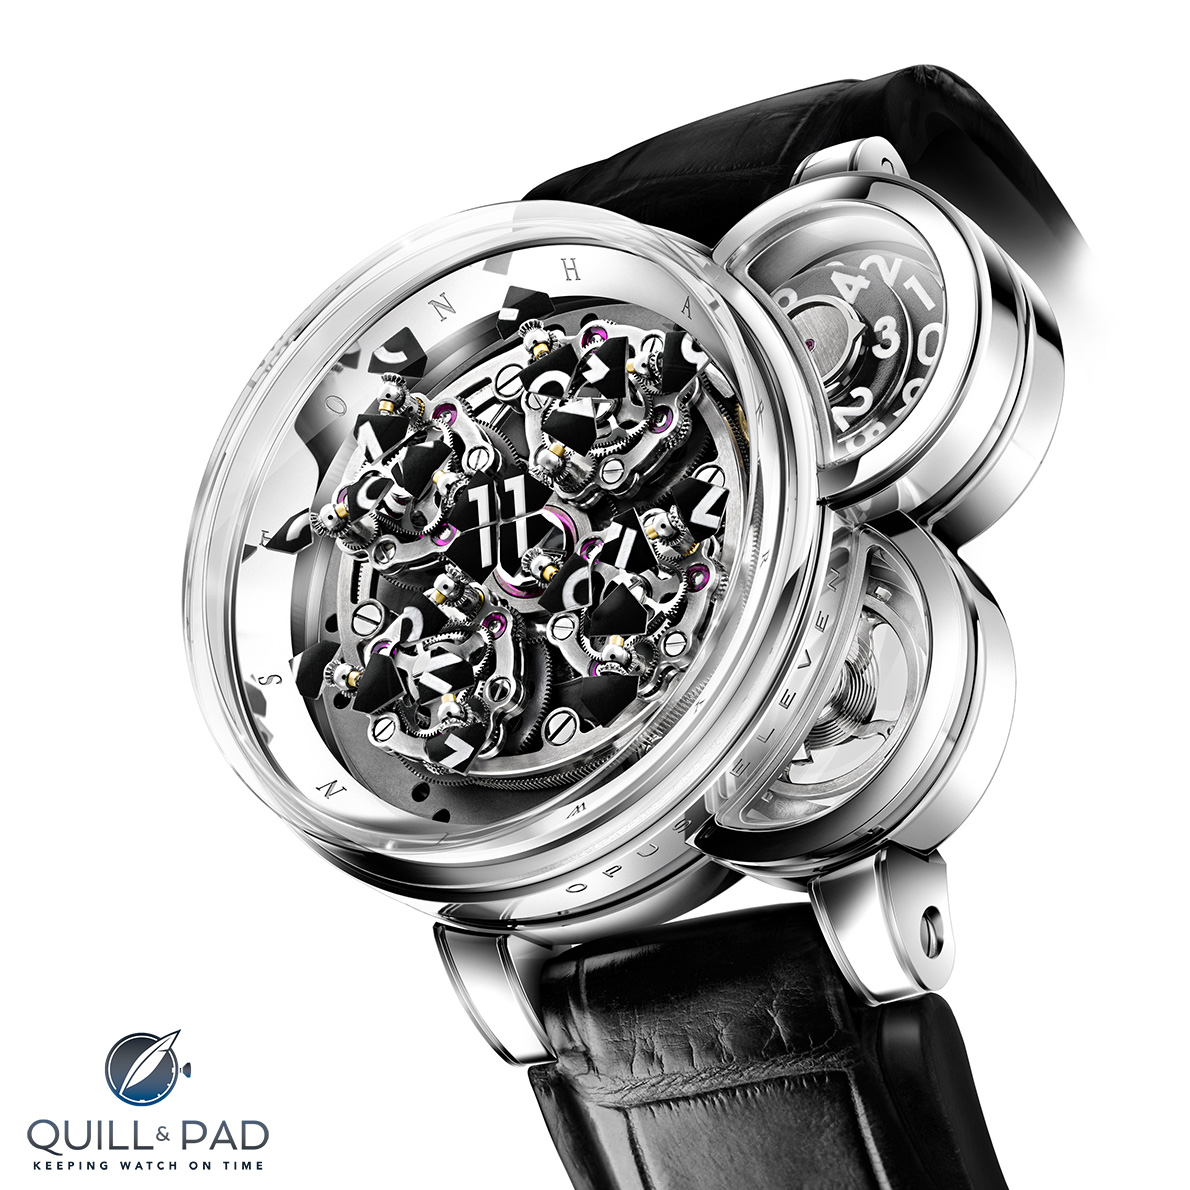 Harry Winston Opus 11 by Denis Giguet/MCT